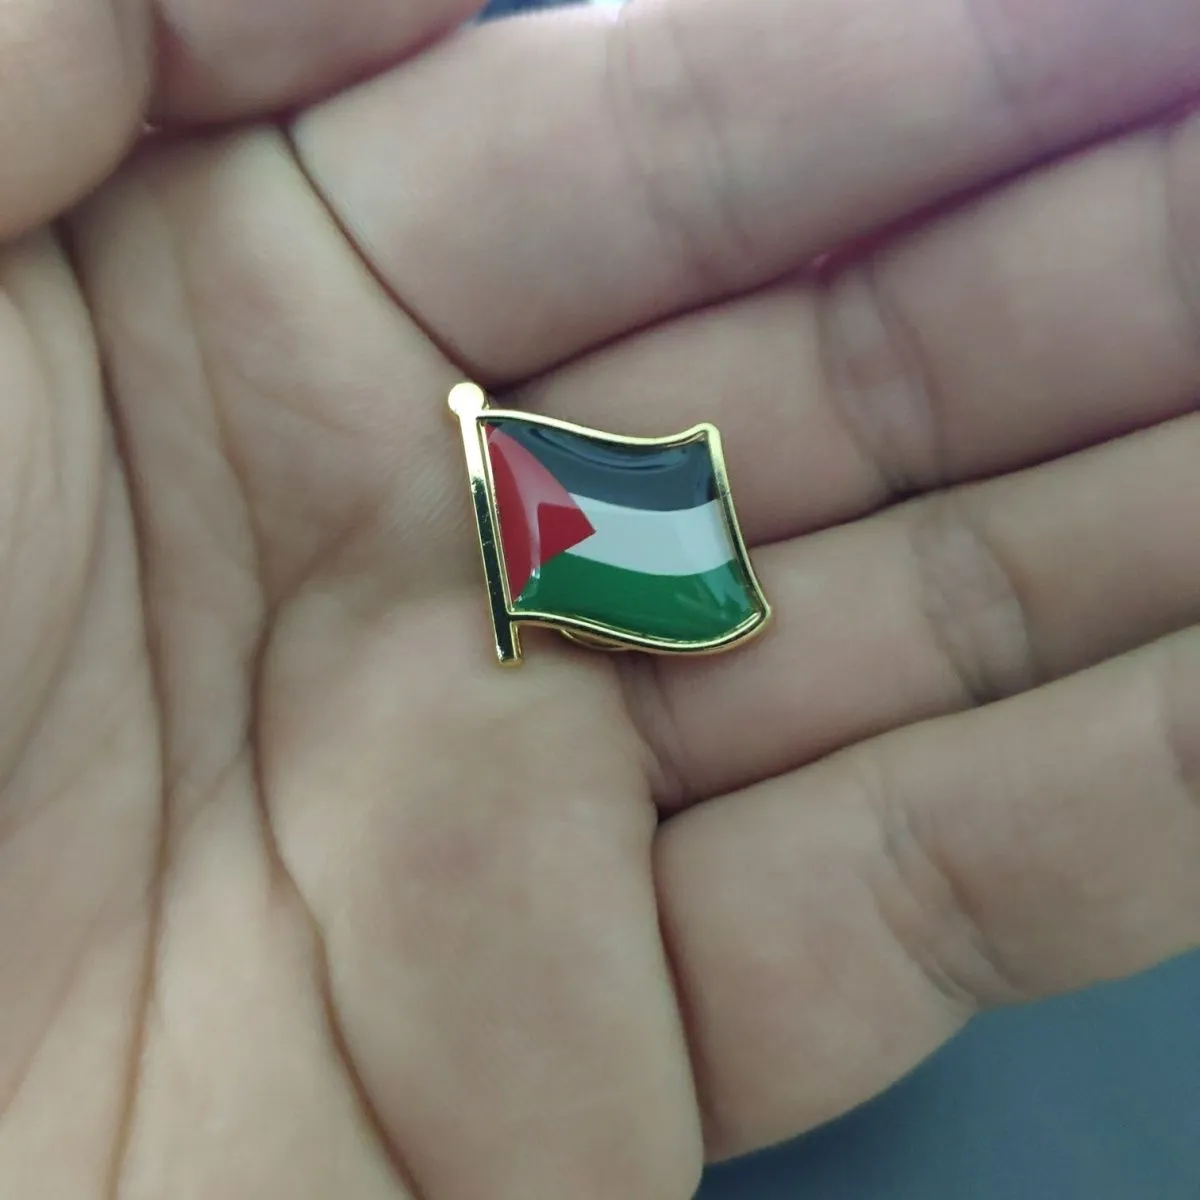 Palestinian Flag Pin Brooch Hardest Metal On Earth Lapel Badge For National  Emblem From Yinke_led, $3.8